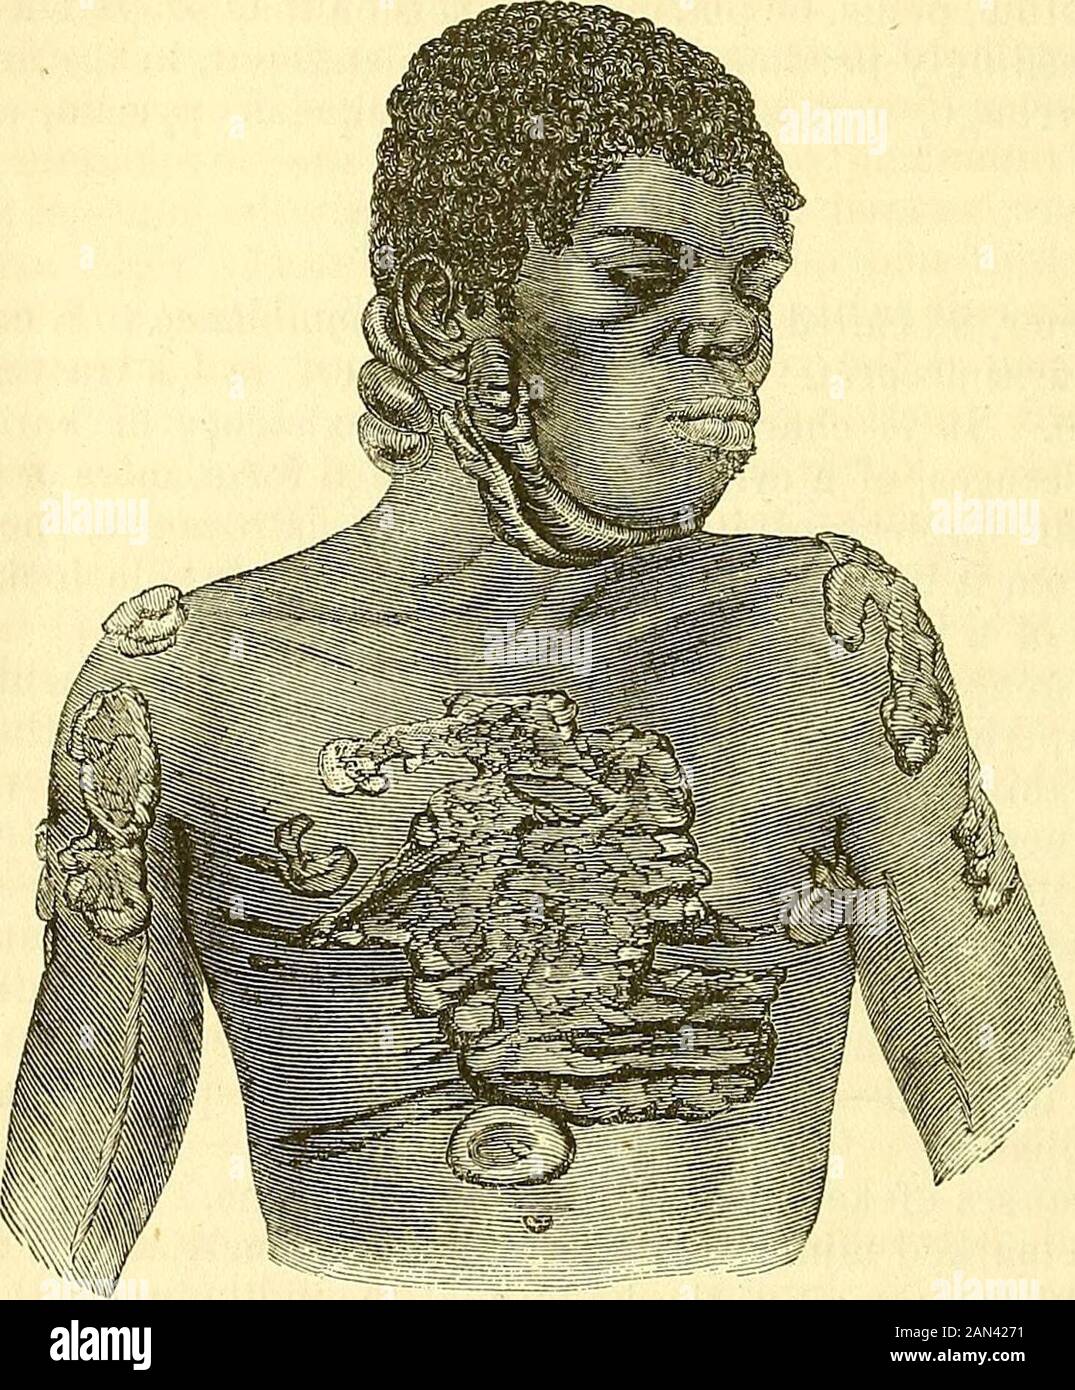 A system of surgery : pathological, diagnostic, therapeutic, and operative . ^ observation, an immense number of these excrescences appeared spon-taneously upon different parts of the body within a few months after the firstmanifestation of the morbid action. The peculiar external characters of keloid will readily be understood from theannexed drawing, fig. 194, taken from a colored man upwards of fifty years of Fig. 194.. Keloid tumors. age, whose body was literally covered with morbid growths of this kind. Theywere particularly numerous on the neck and trunk, both in front and behind, andals Stock Photo